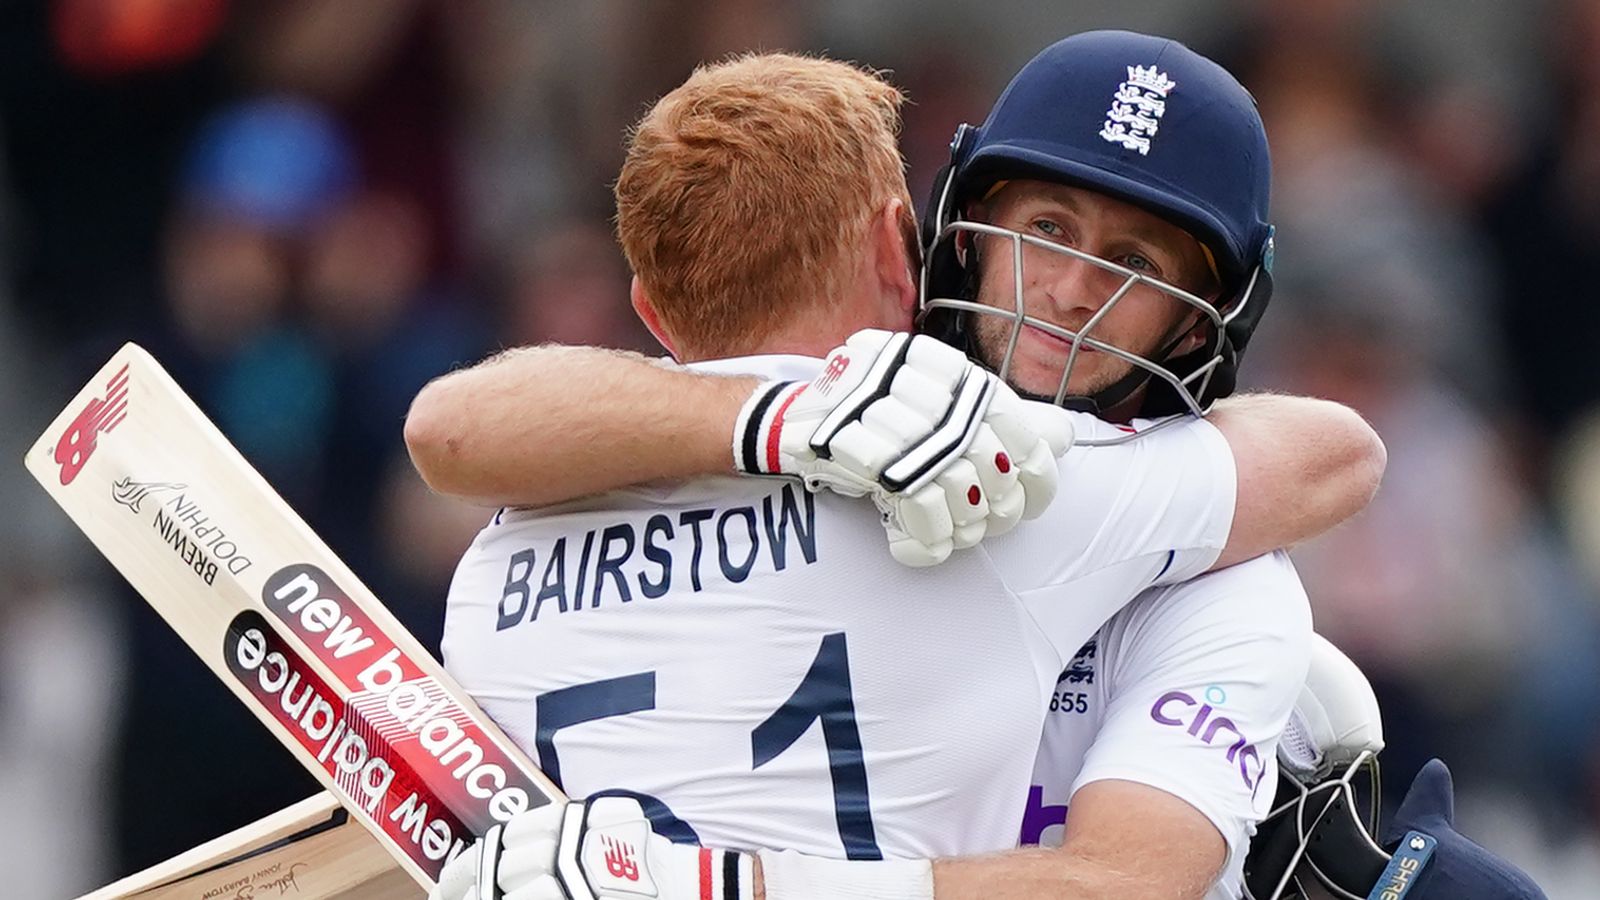 Joe Root and Jonny Bairstow put England on the cusp of famous final-Test win over India as record run chase in sight | Cricket News | Sky Sports